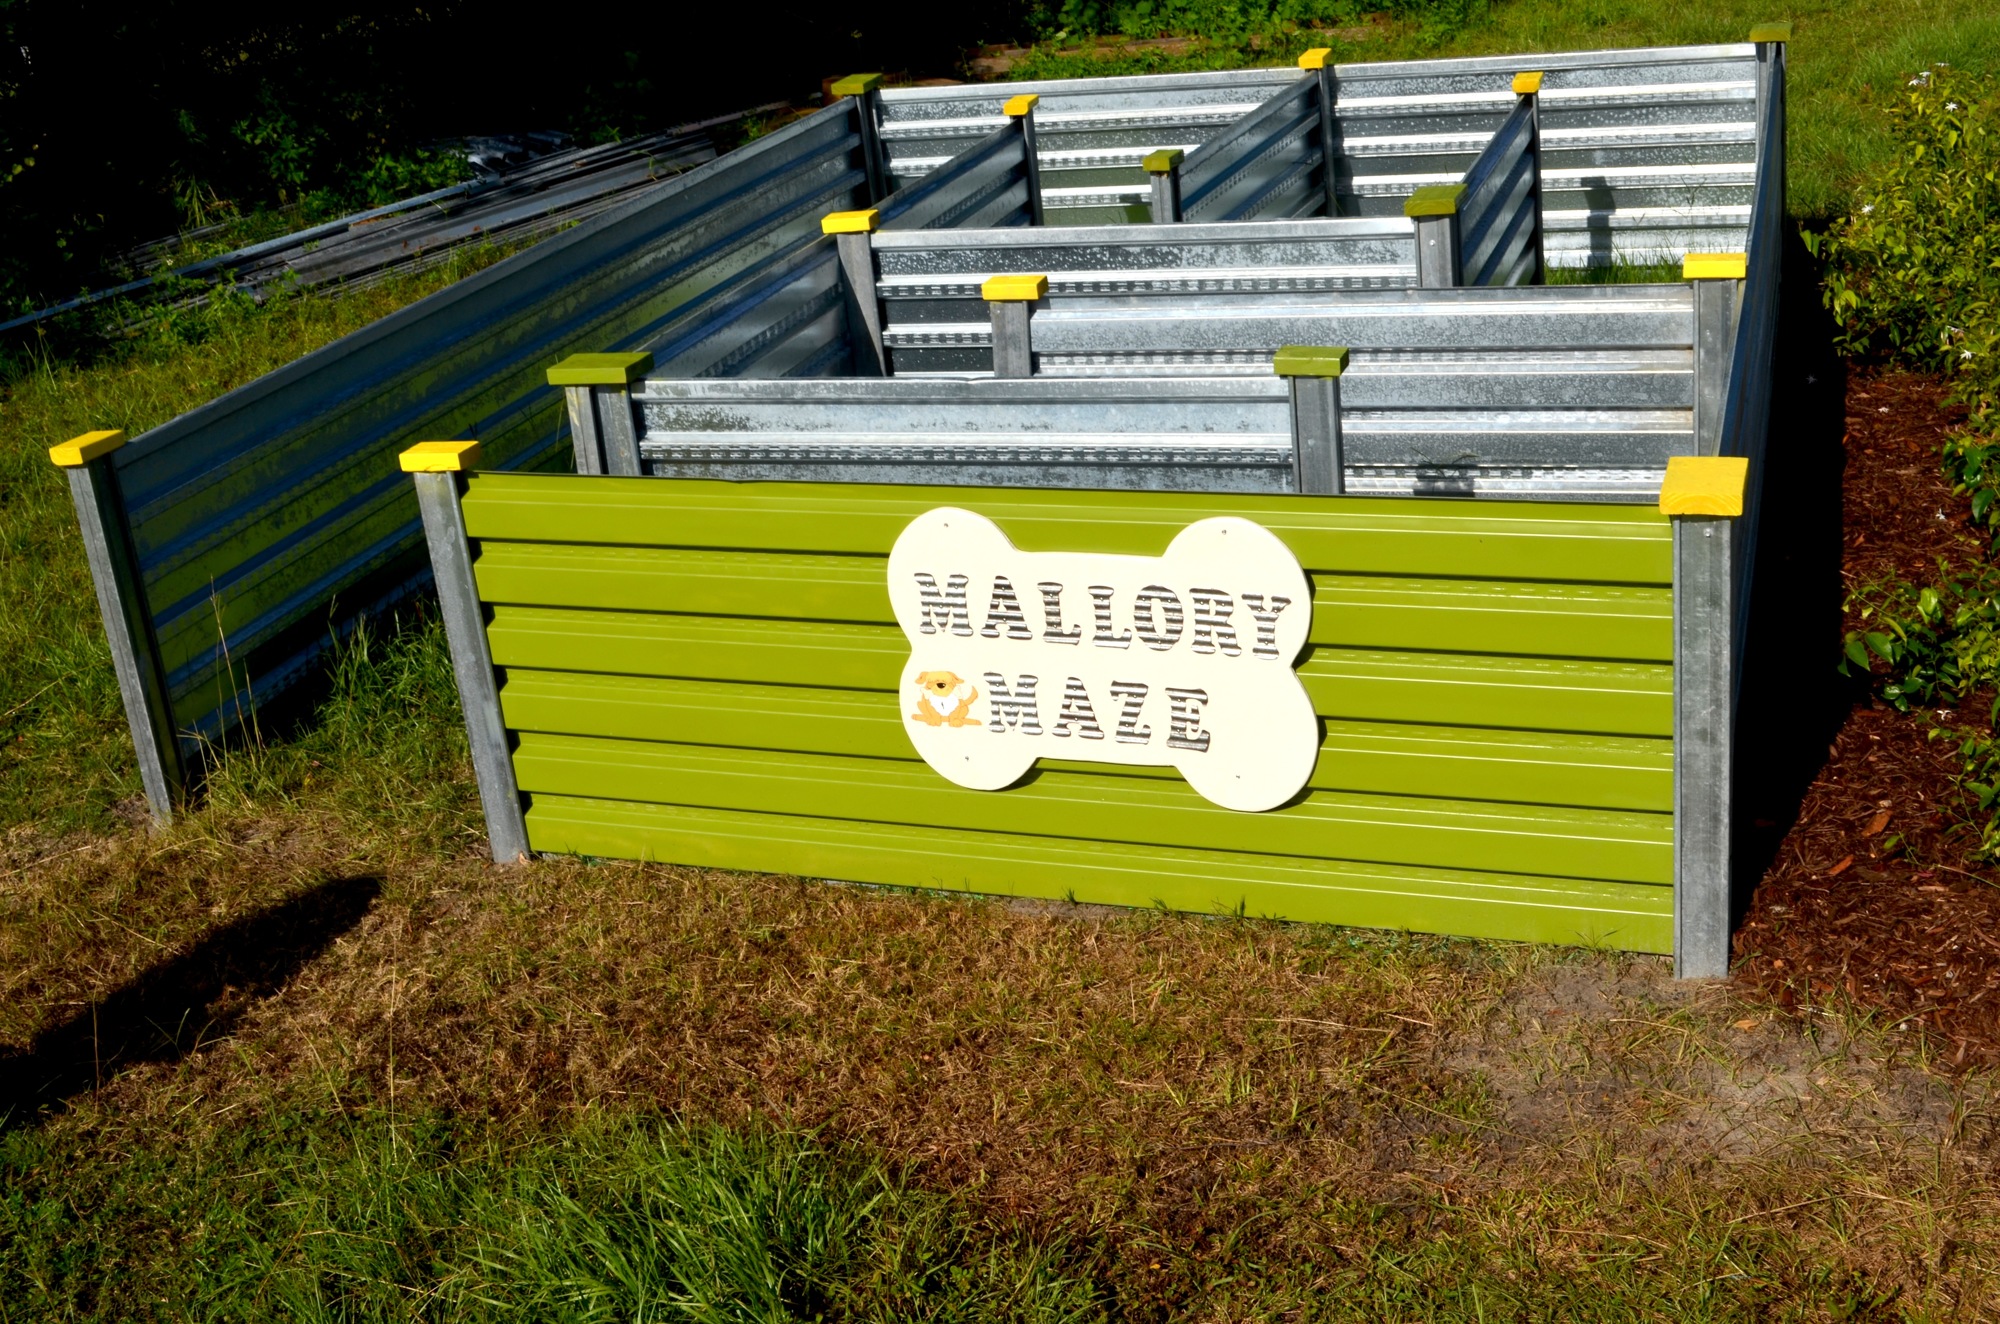 The Mallory Maze helps improve animals' sense of direction and fear of confinement.